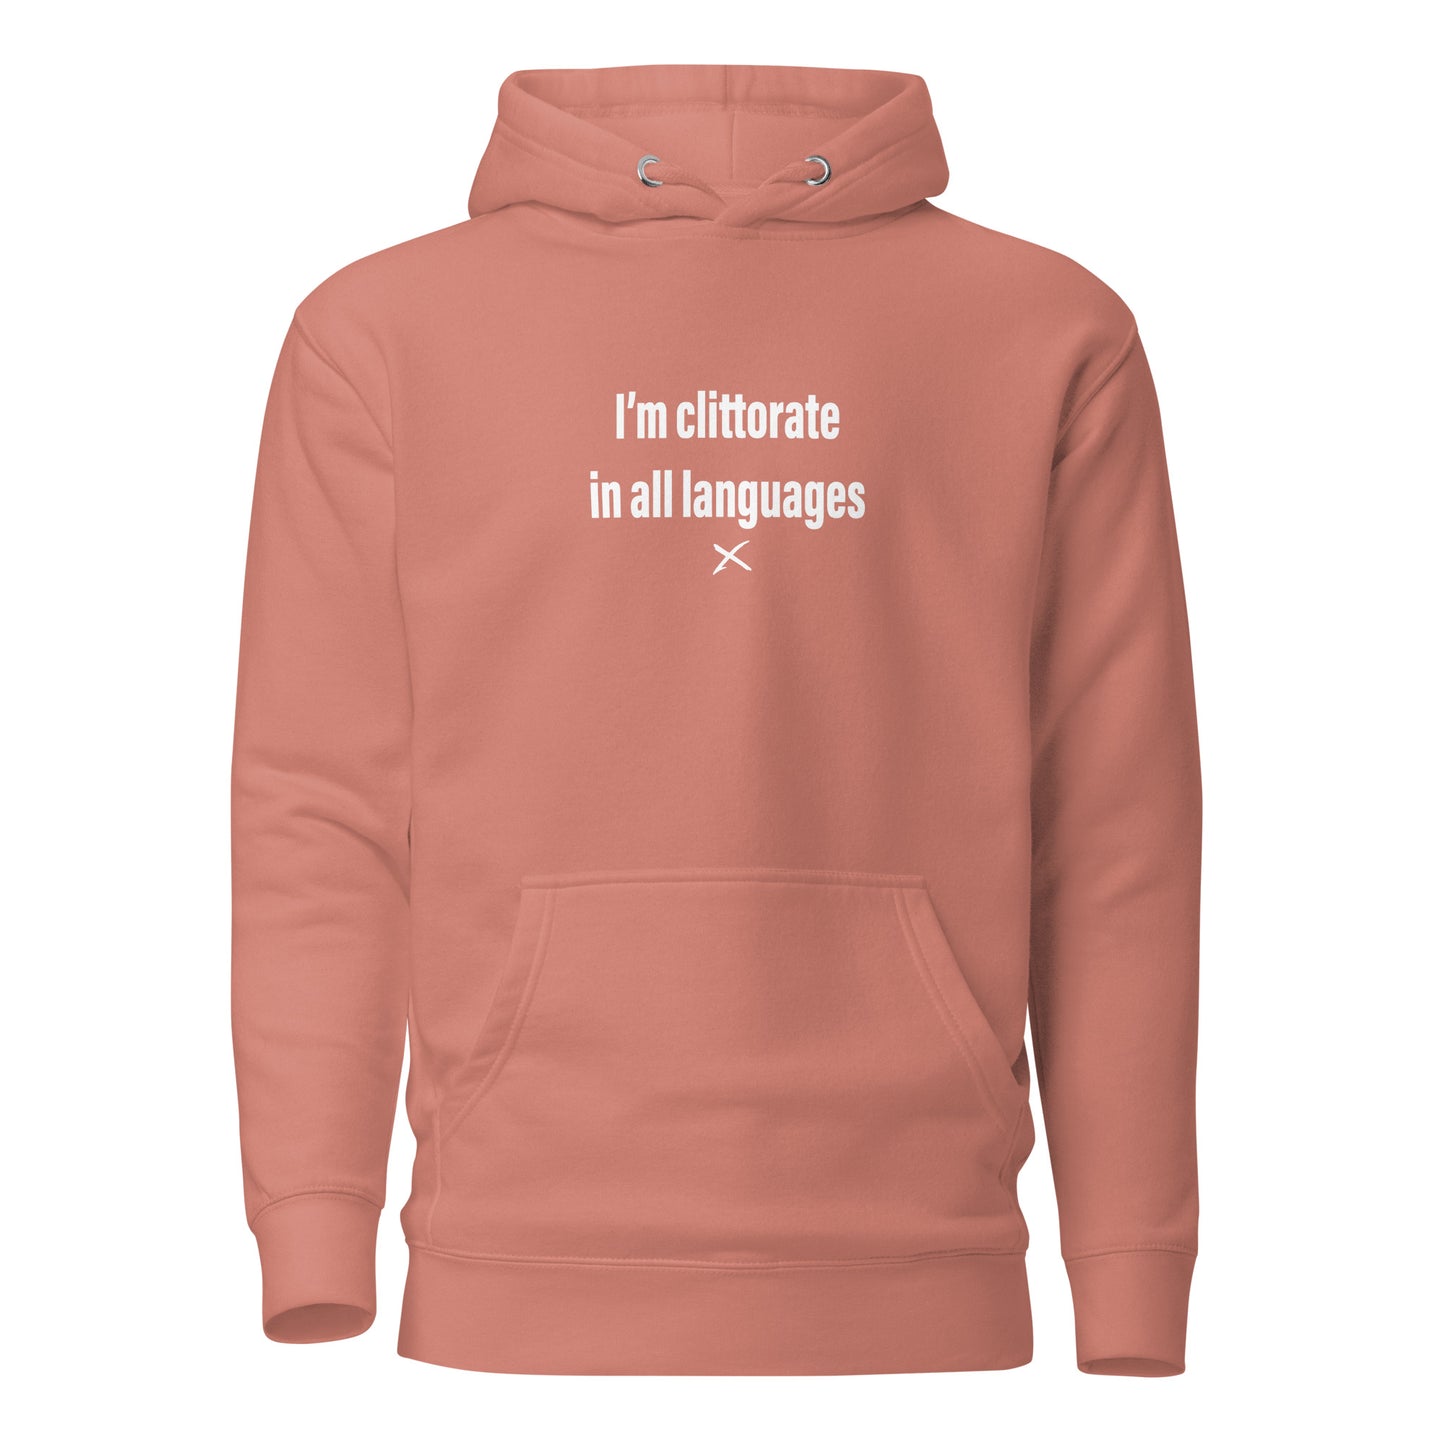 I'm clittorate in all languages - Hoodie